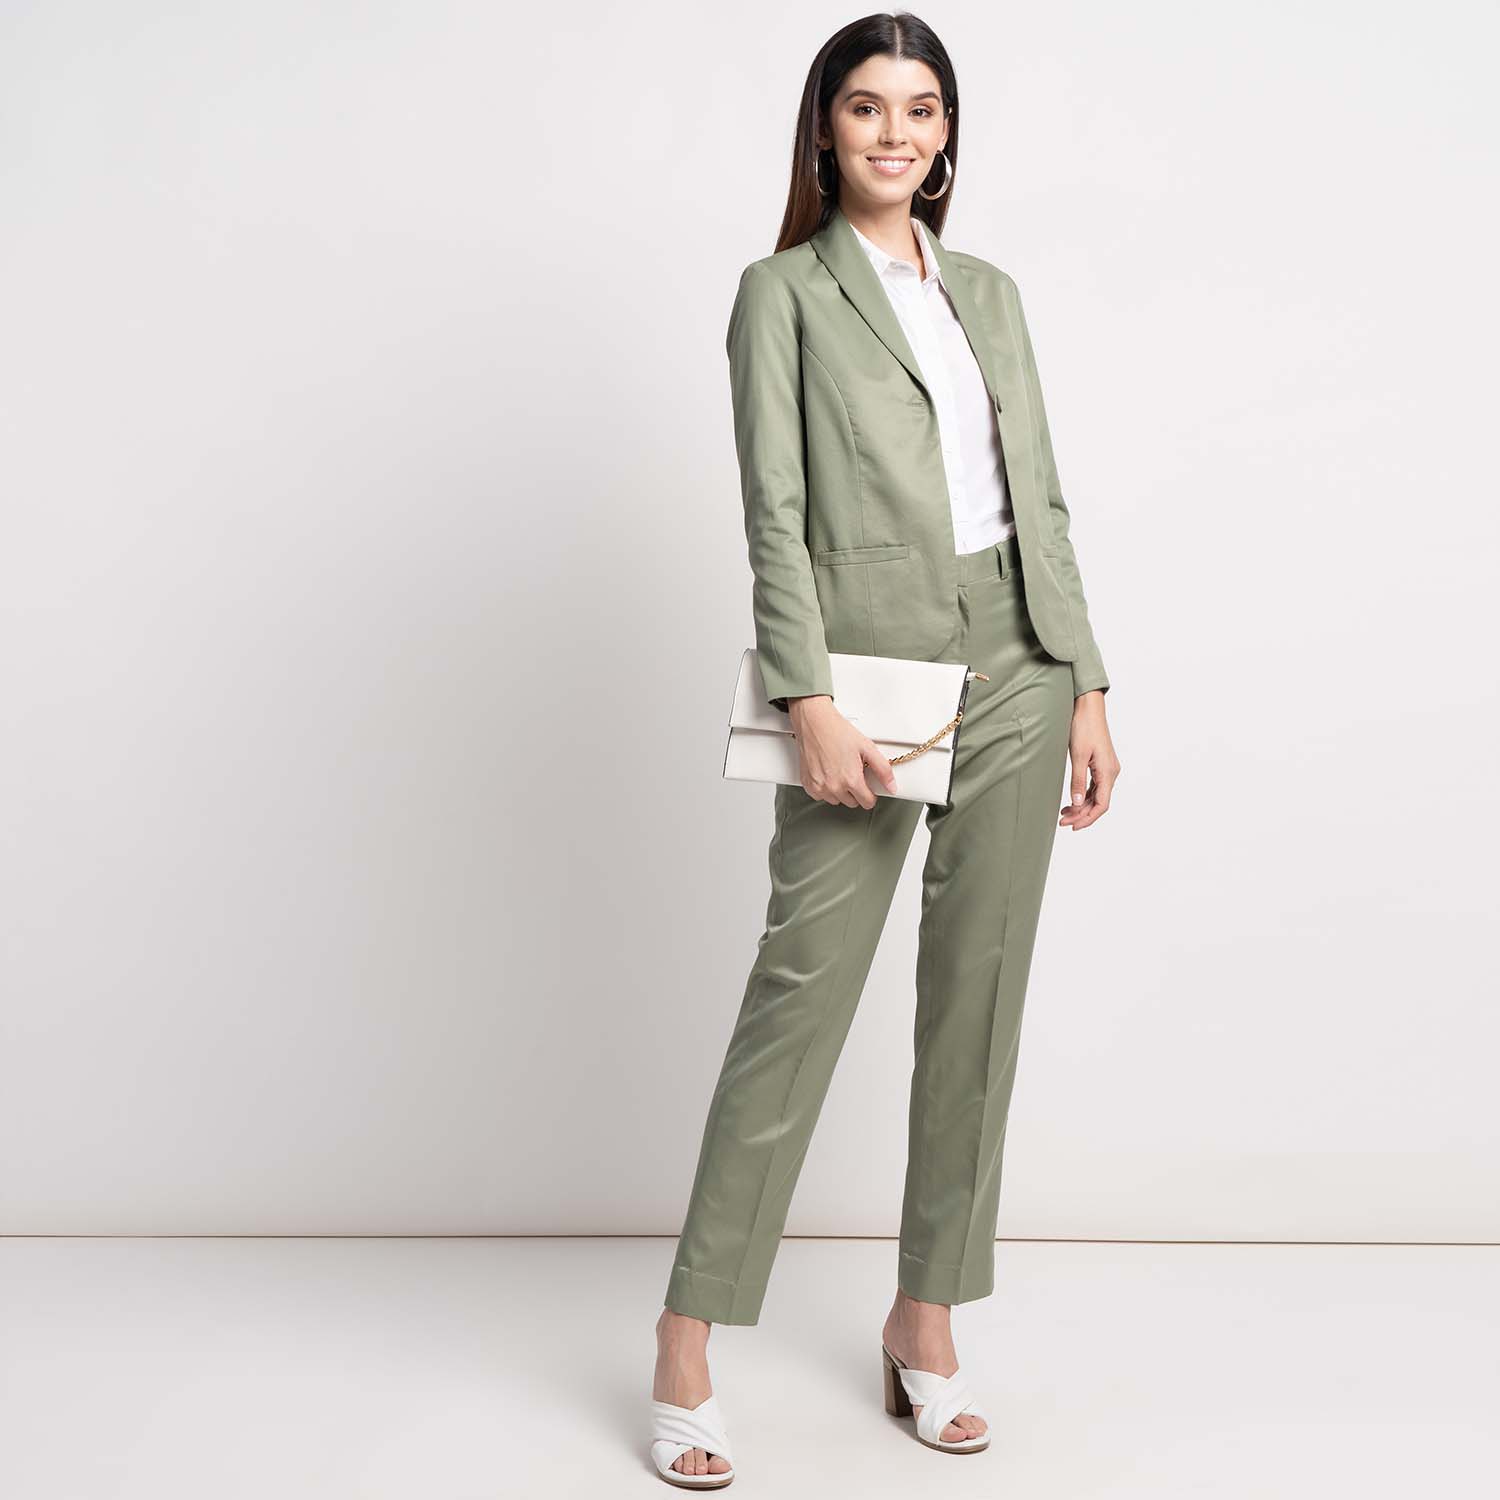 Best Special Occasion Pant Suits for Weddings and Events | Pantsuits for  women, Event dresses, Dressy pant suits